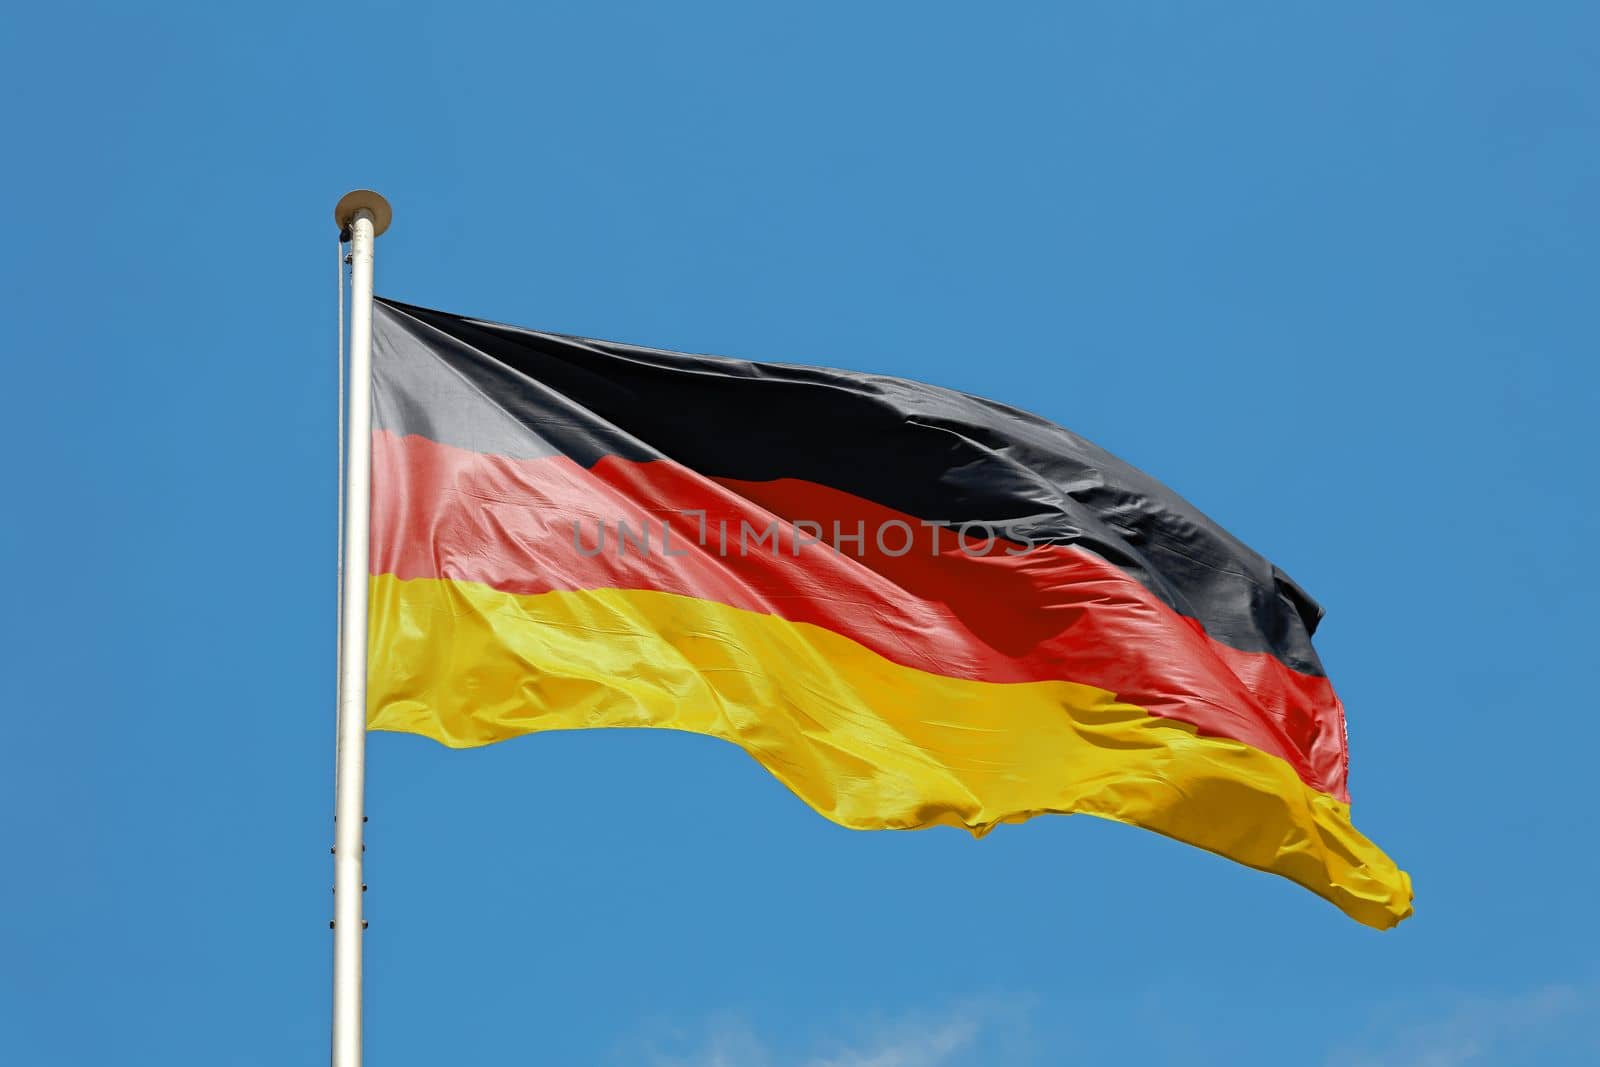 National flag of Germany flying and waving in the wind on flagstaff over clear blue sky, symbol of German patriotism, low angle, side view